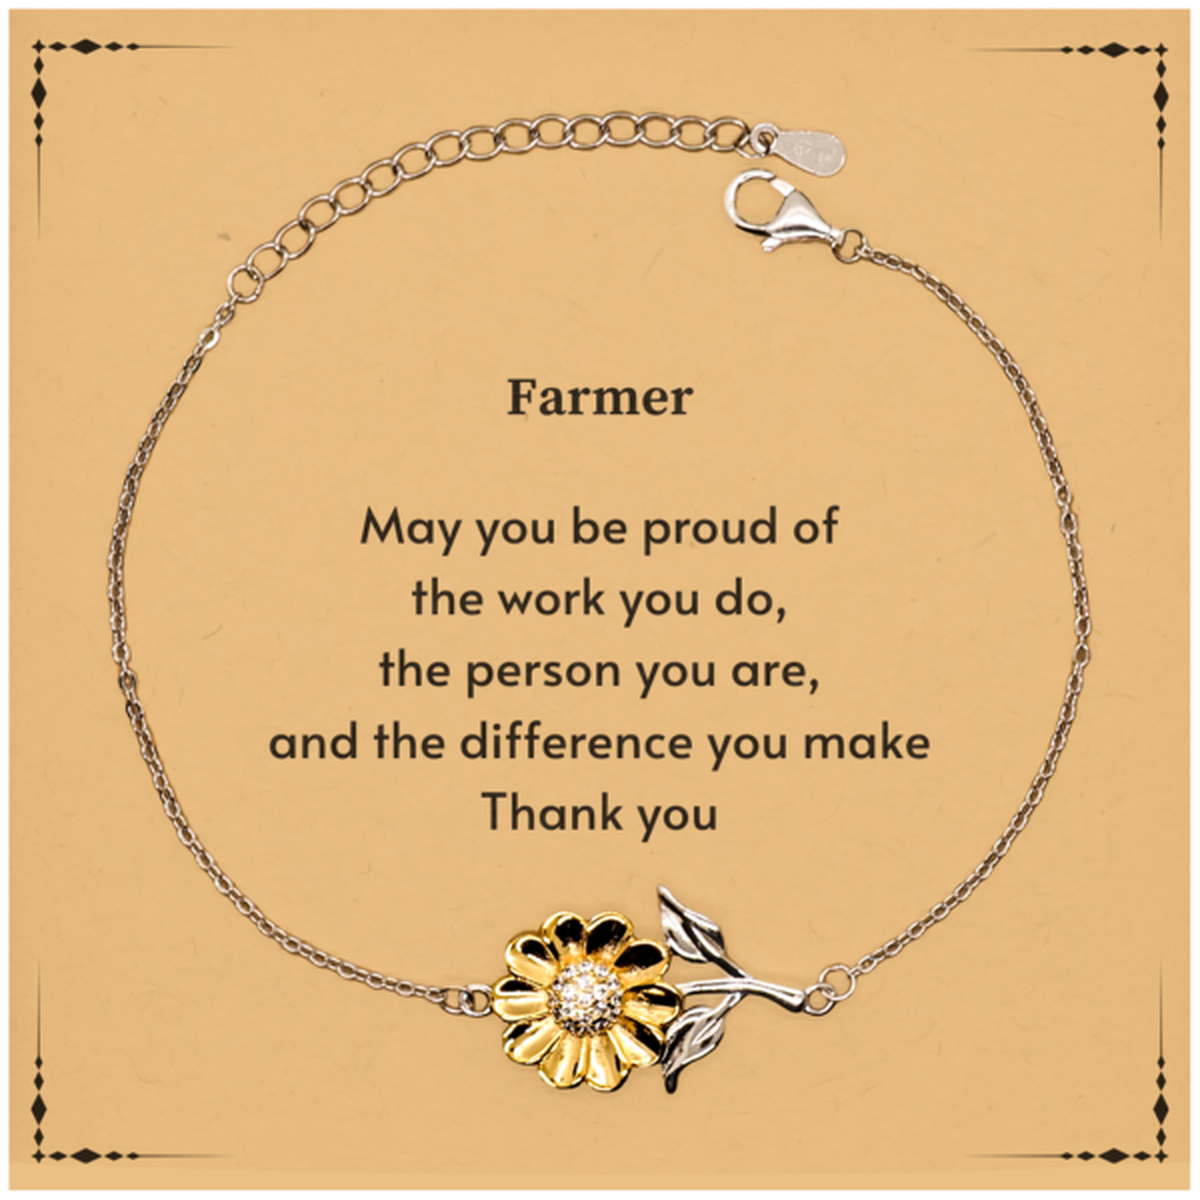 Heartwarming Sunflower Bracelet Retirement Coworkers Gifts for Farmer, Farmer May You be proud of the work you do, the person you are Gifts for Boss Men Women Friends